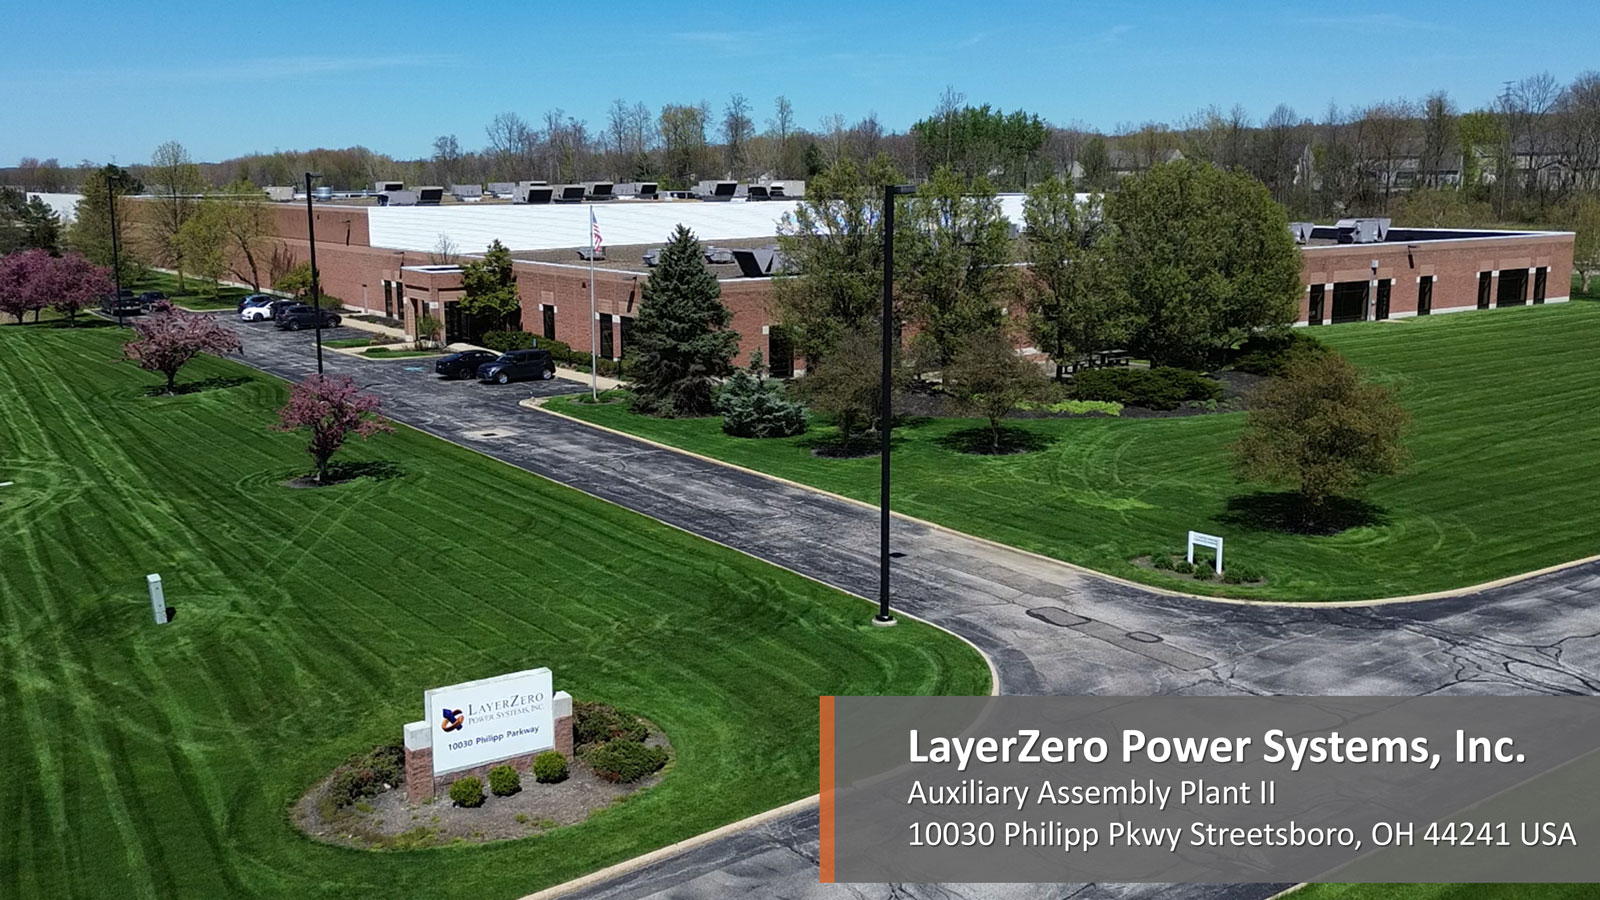 The Assembly Plant II for LayerZero Power Systems